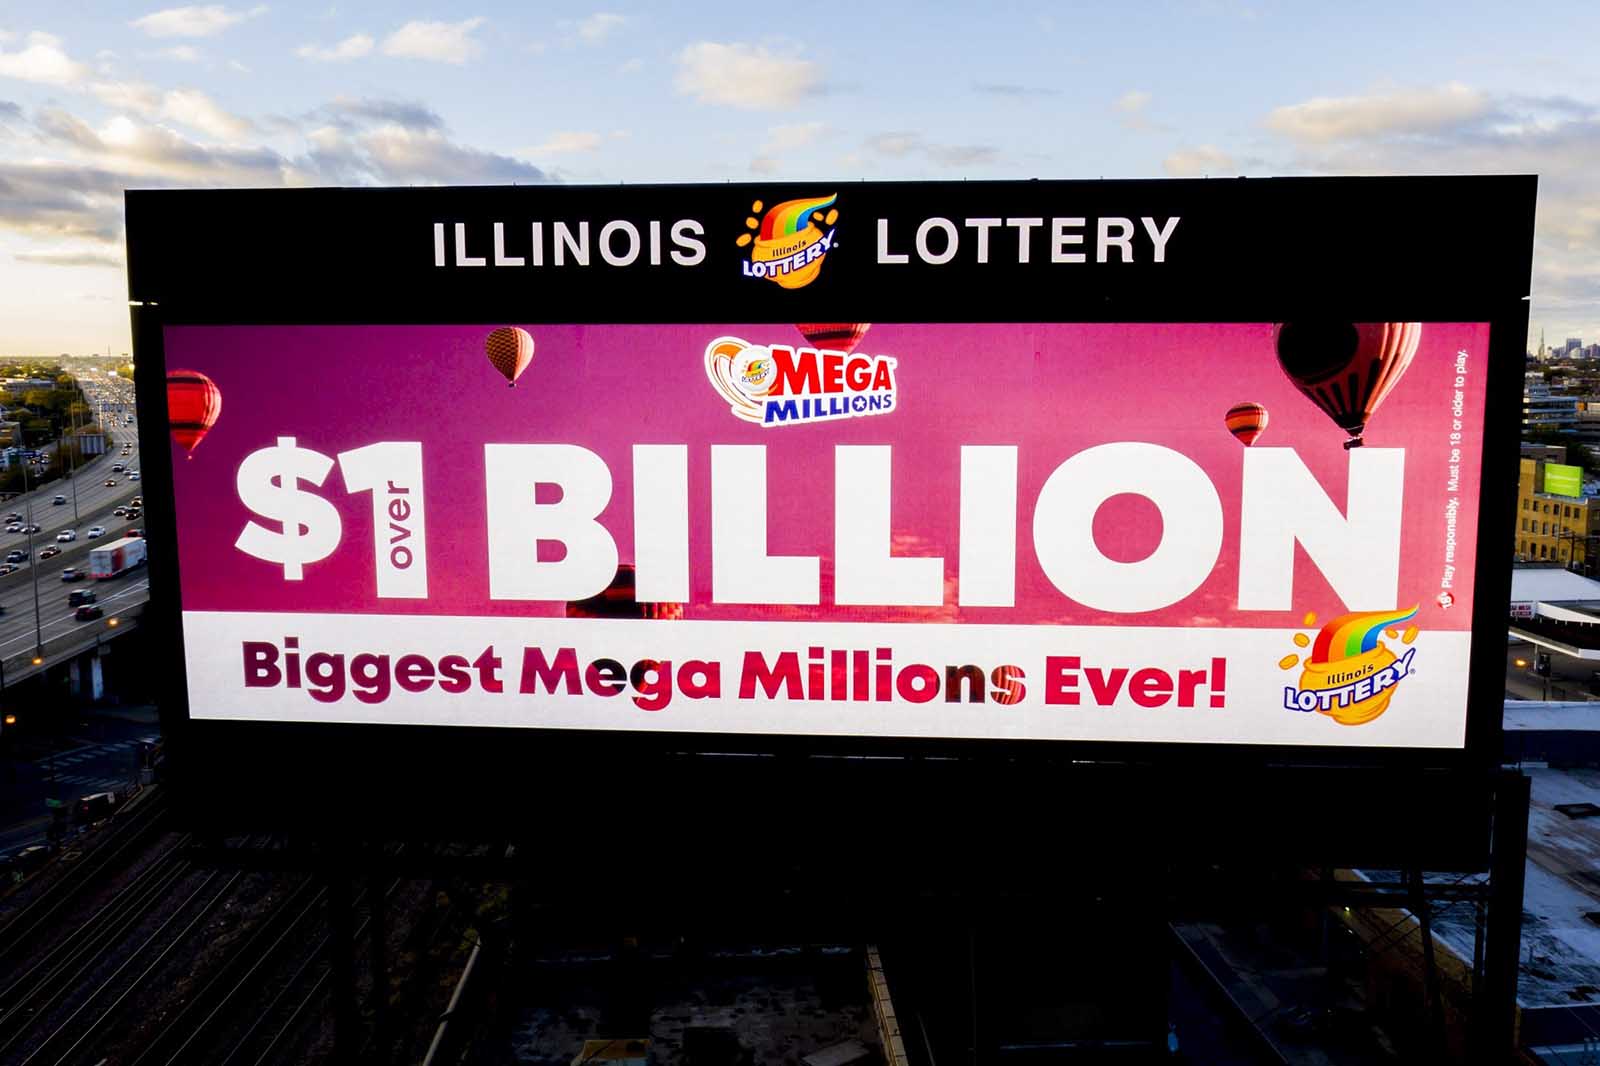 In case you thought most US lottery games were fake, here's some of the real winners of the biggest jackpots in US lottery history. 